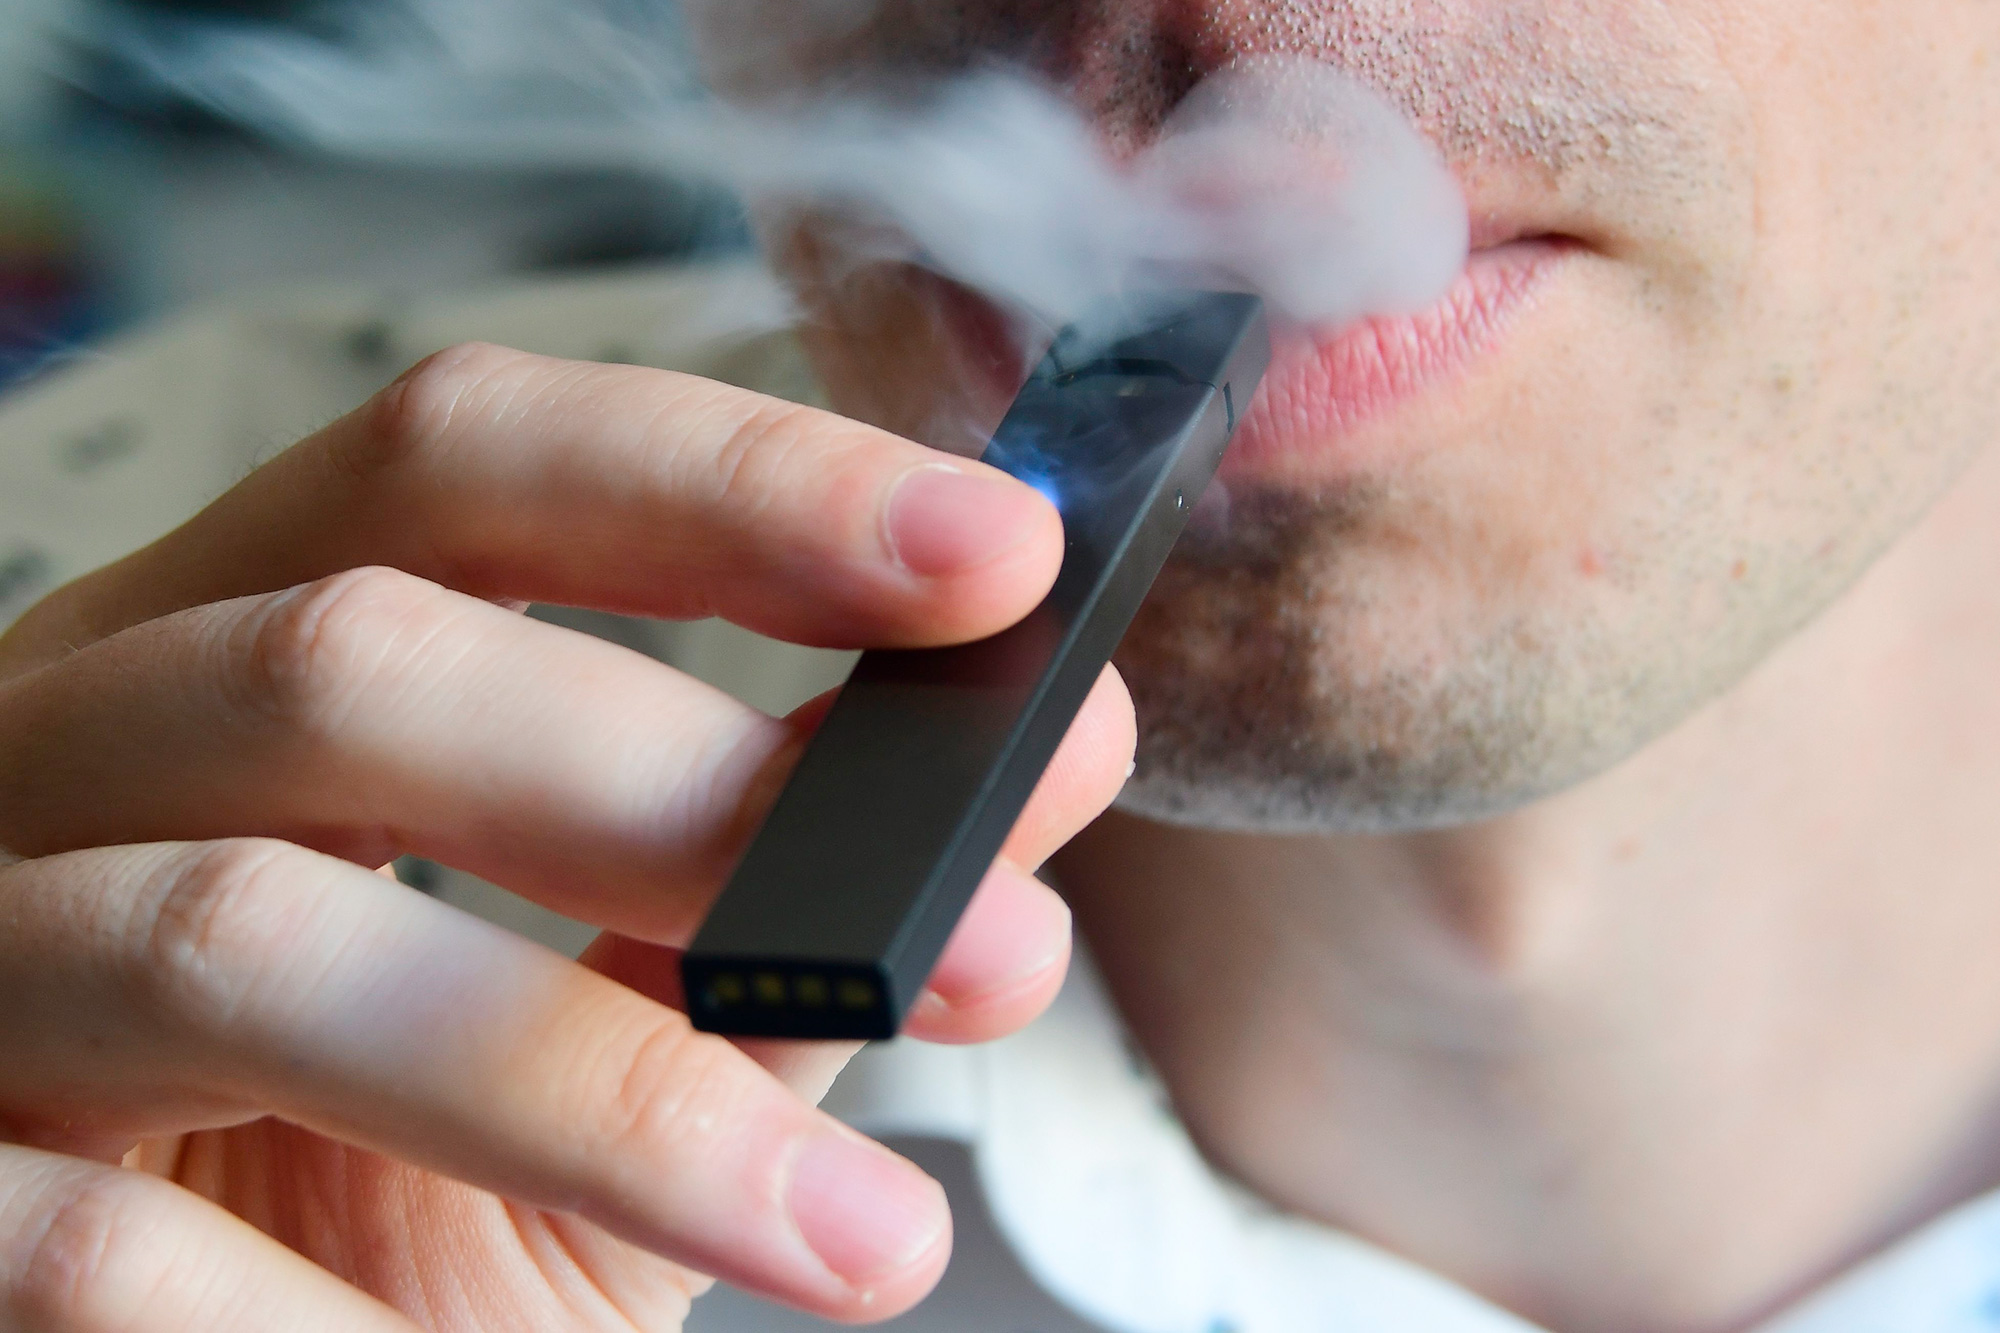 FDA Delays Decision on Banning Juul Products, Citing Need for More Time 